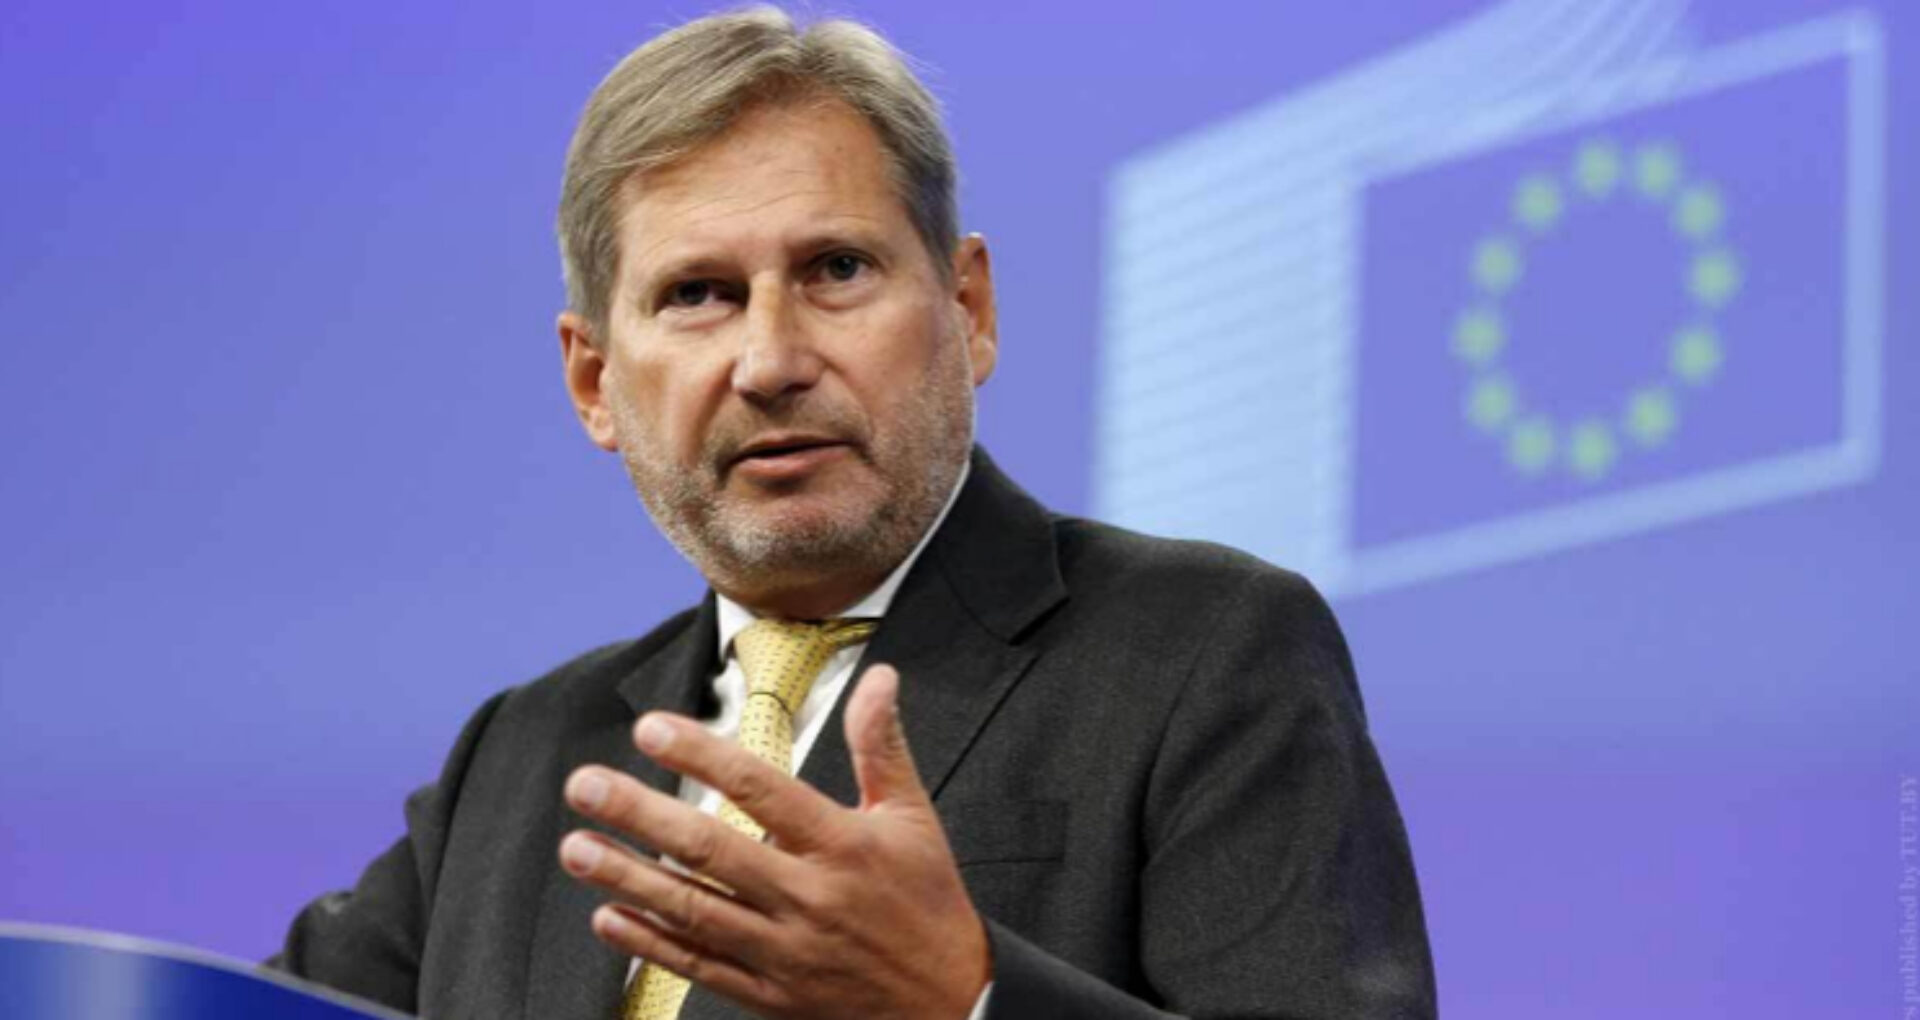 When can macrofinancial assistance be resumed, according to EU Commissioner Johannes Hahn